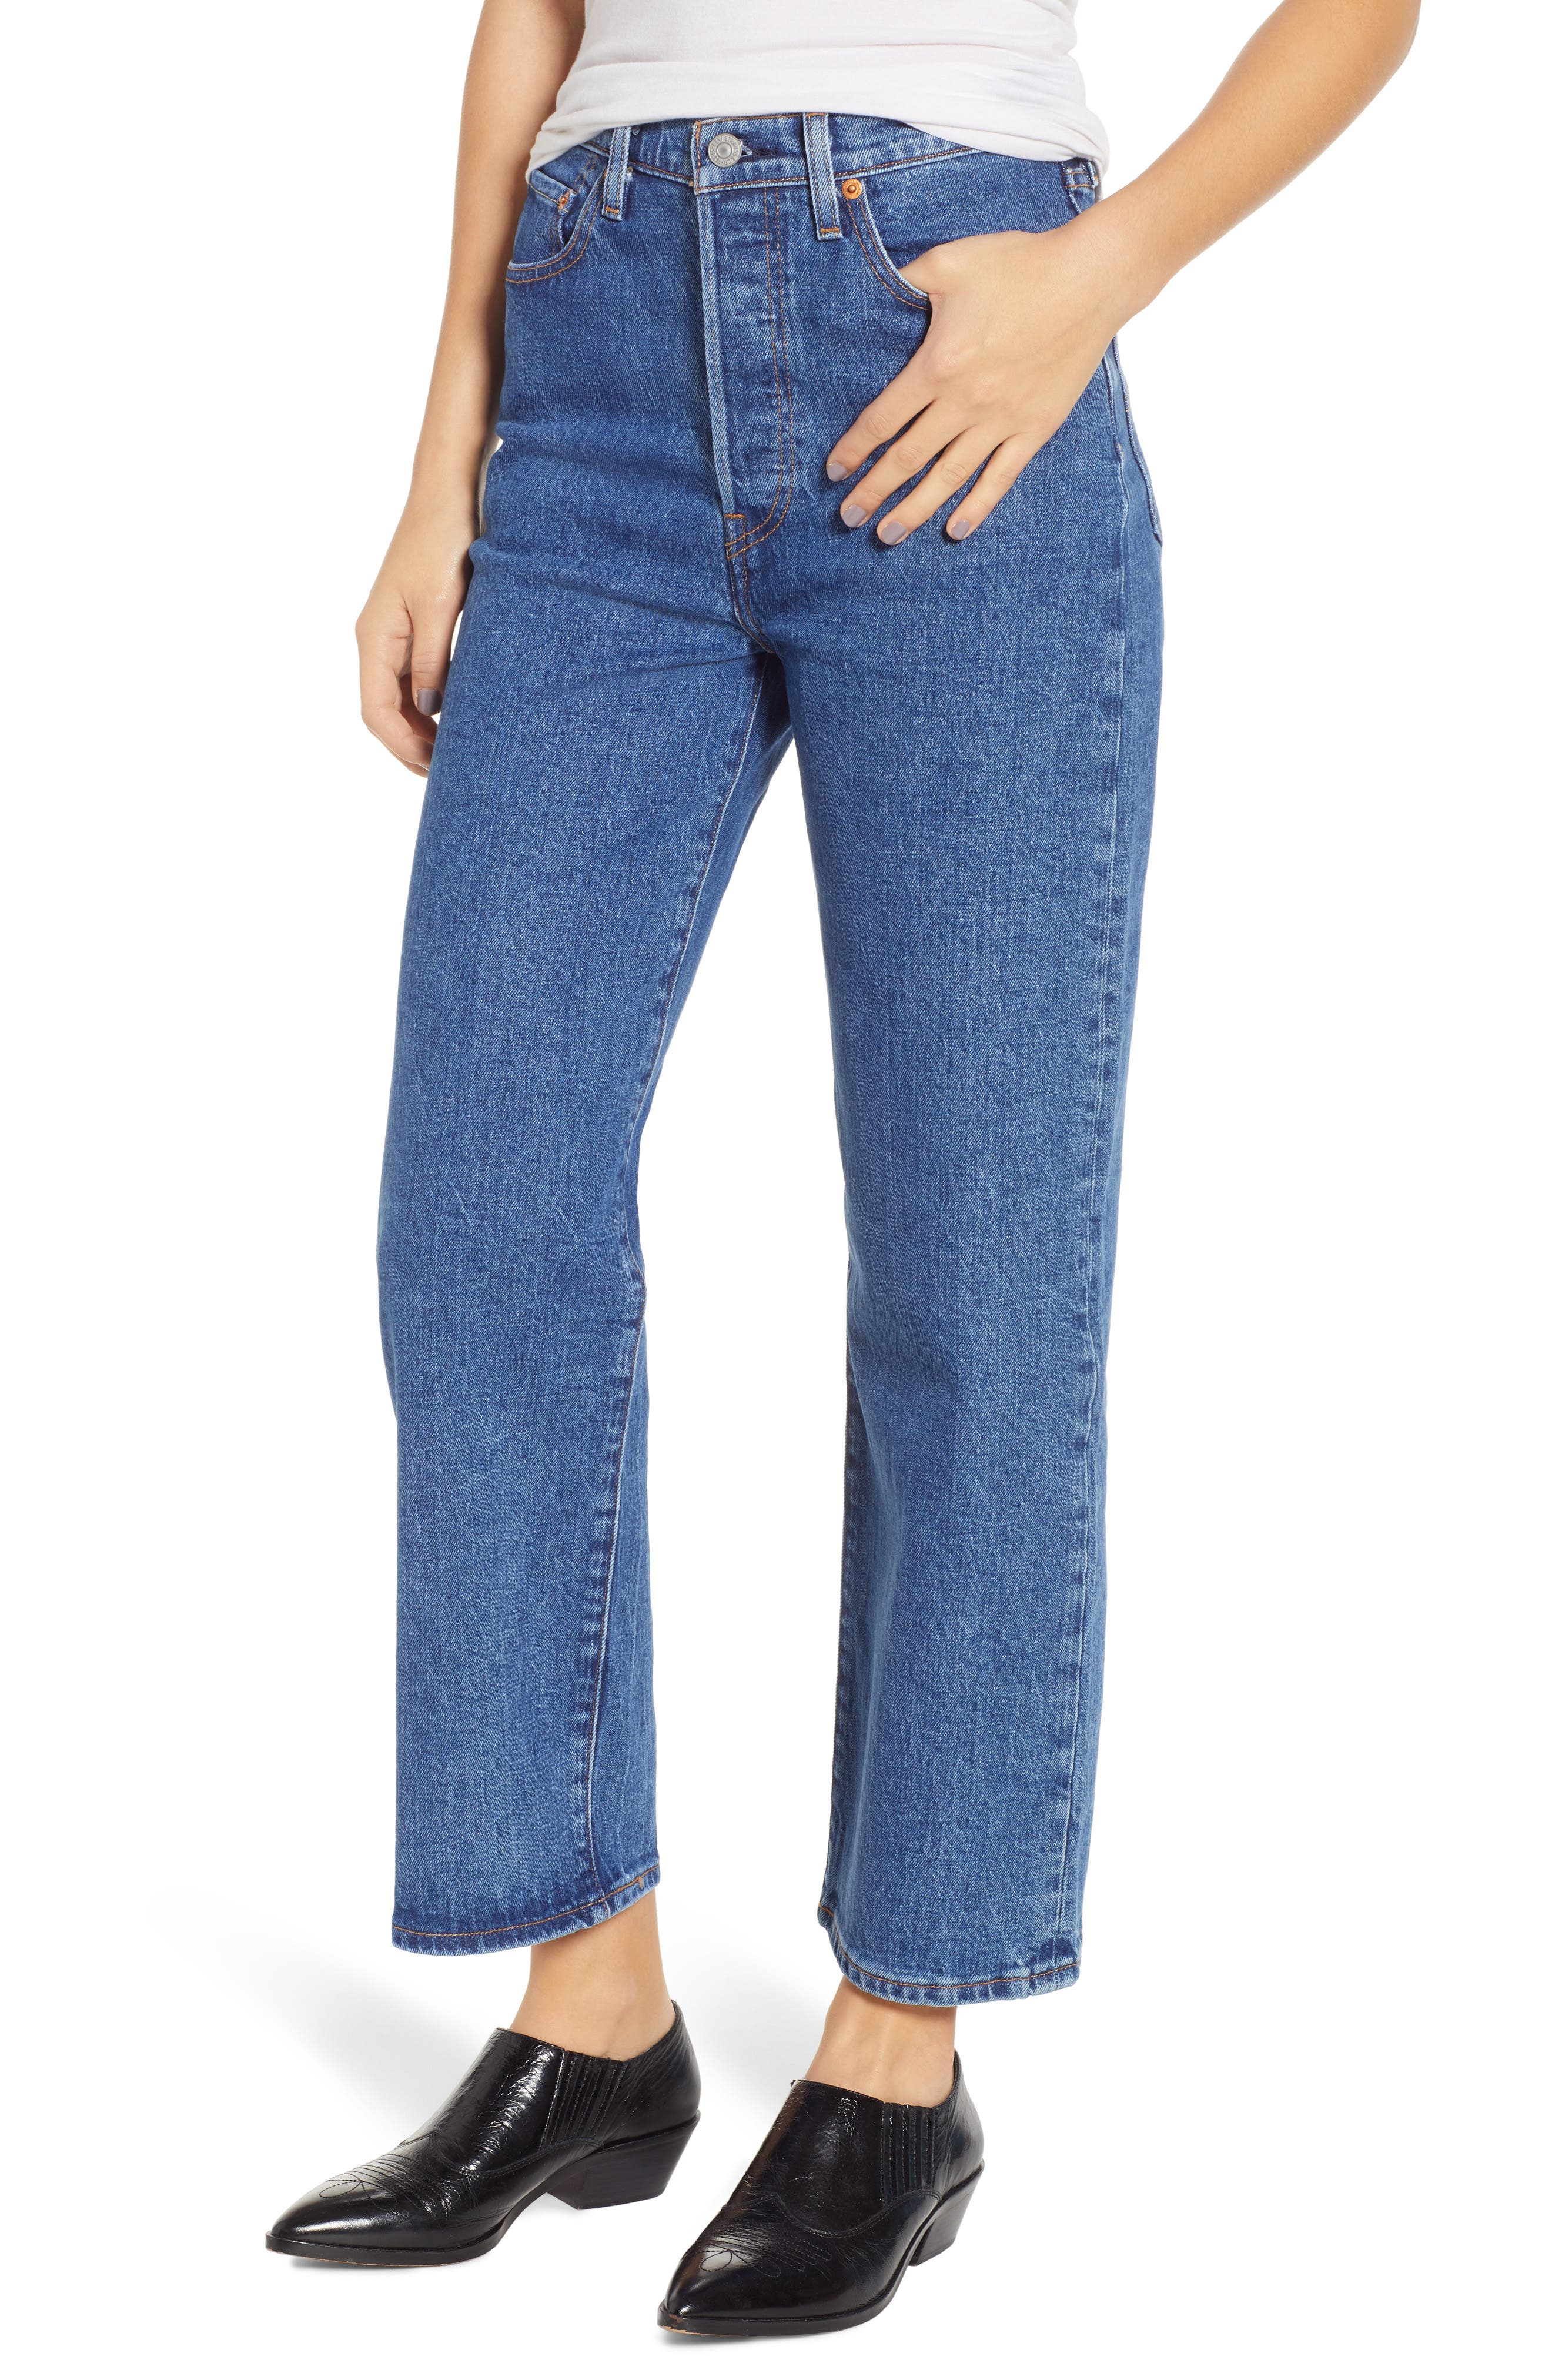 levi's super high waisted jeans